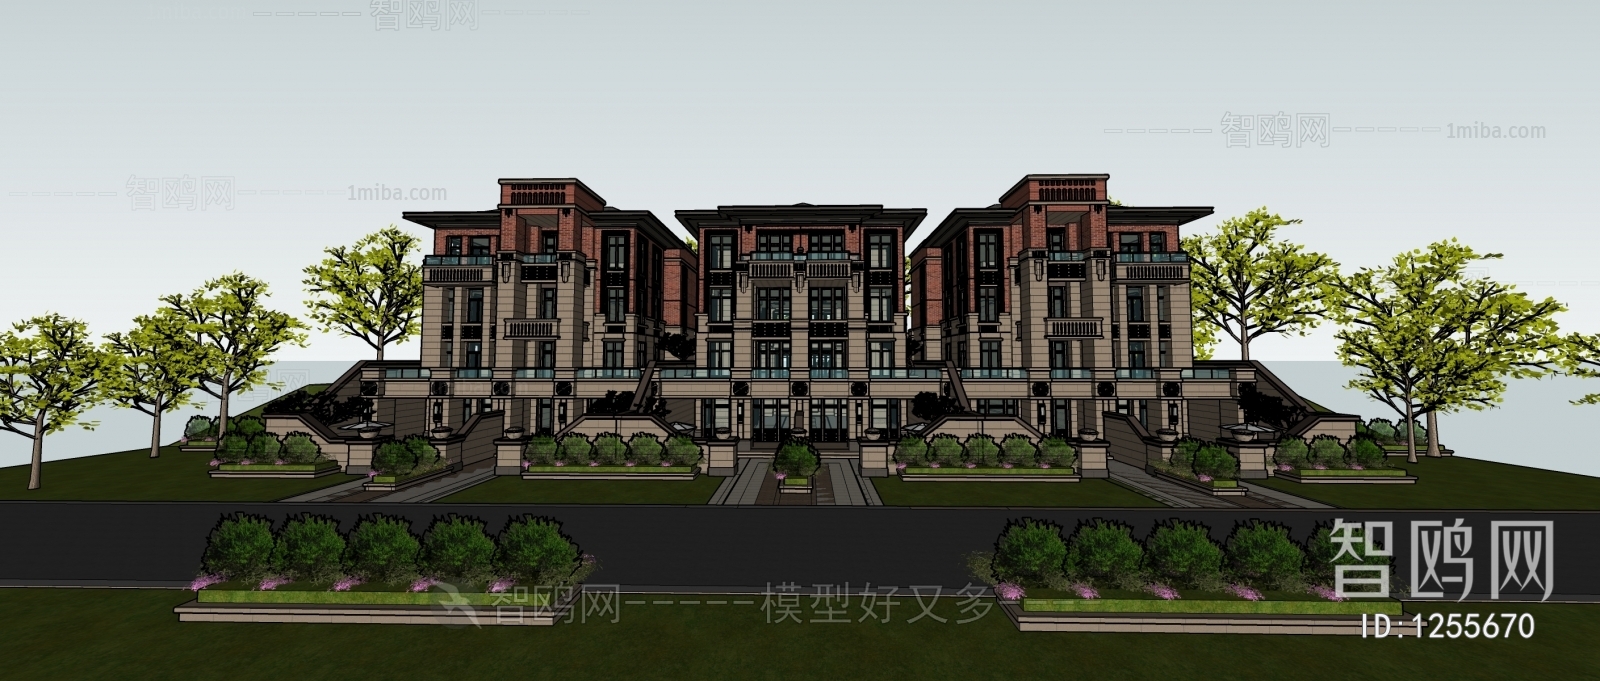 New Classical Style Villa Appearance